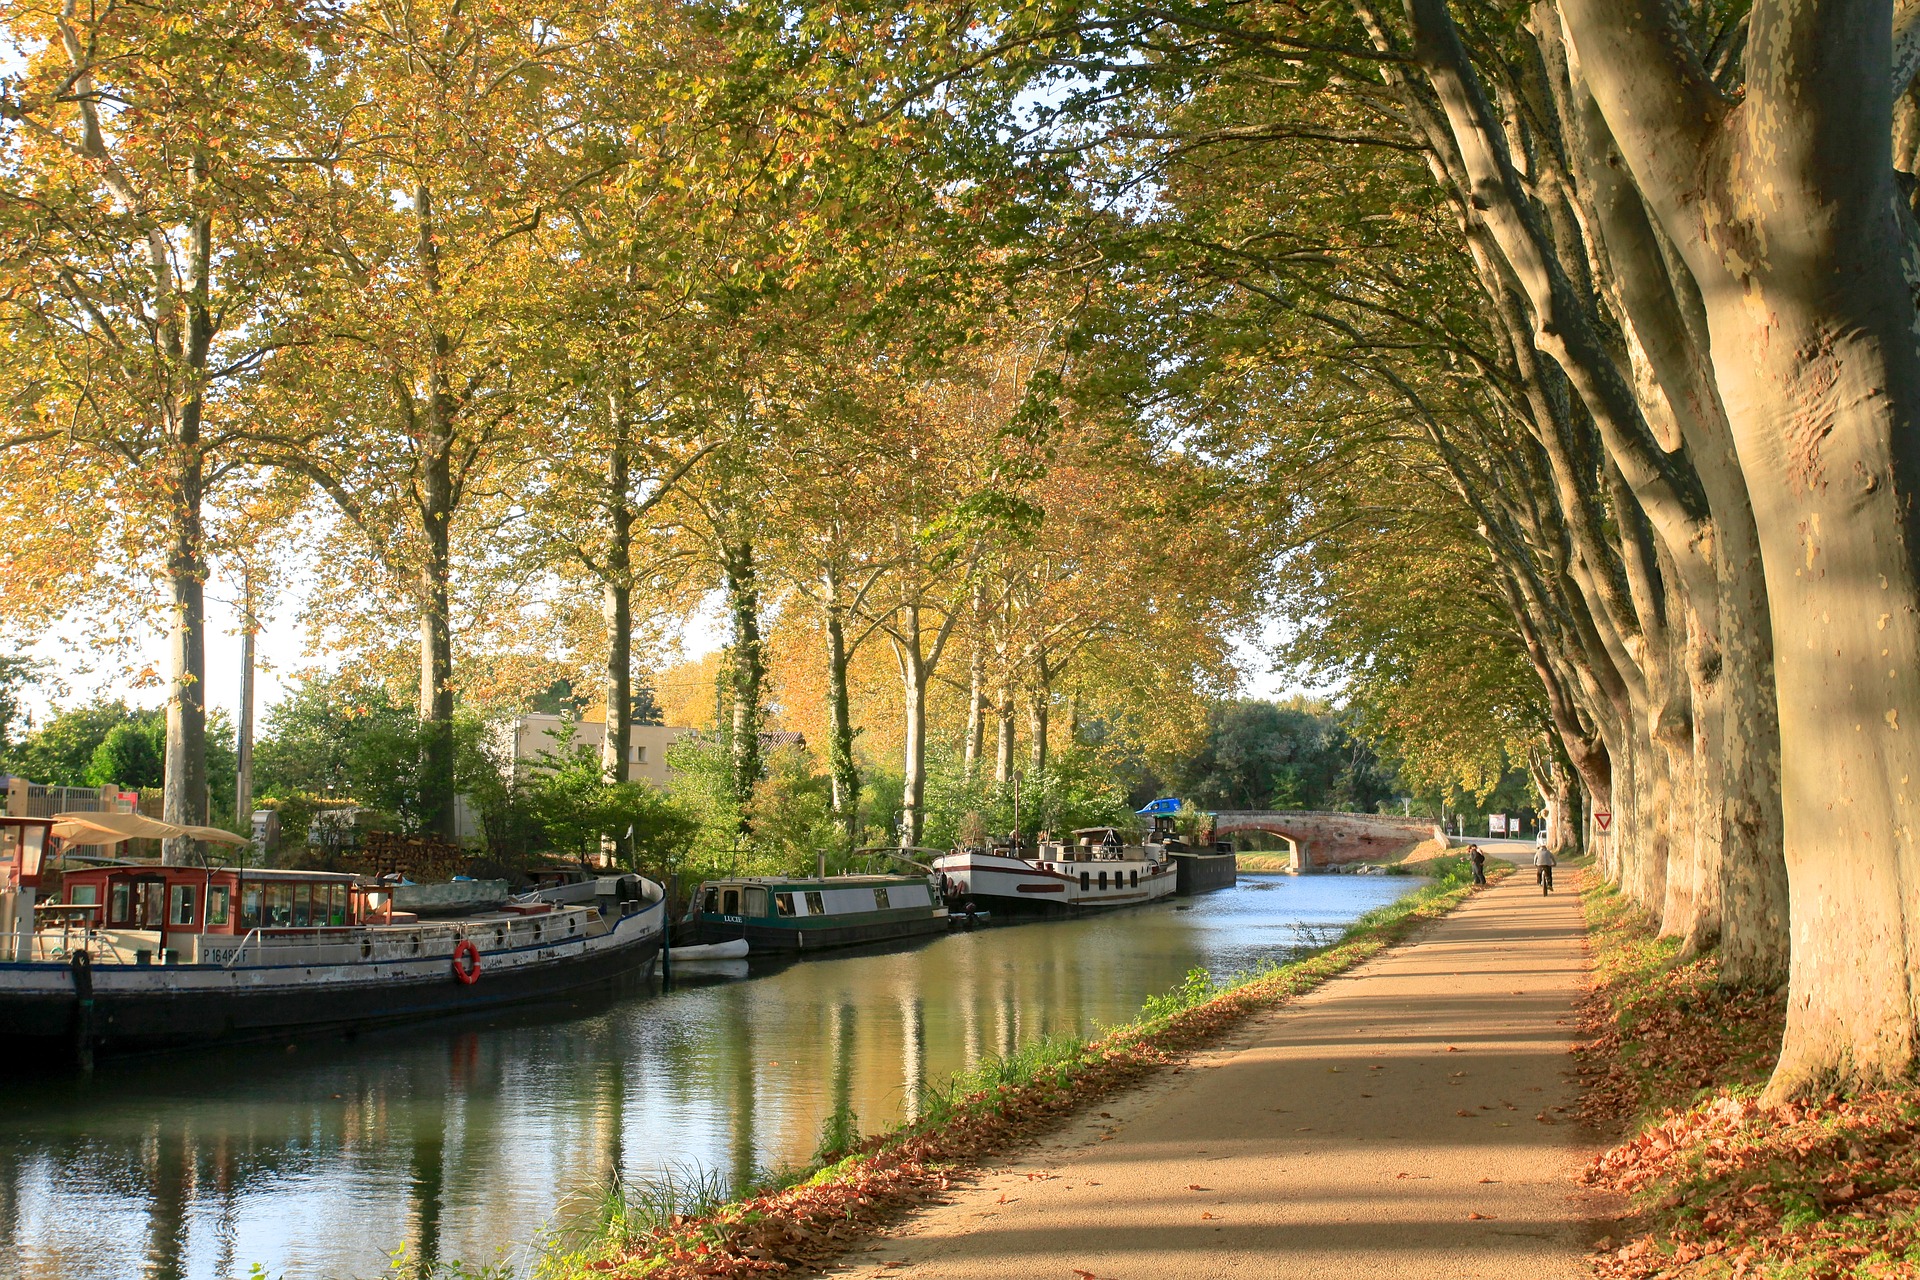 Canal du Midi: The Best and Most Fun Way to Discover France